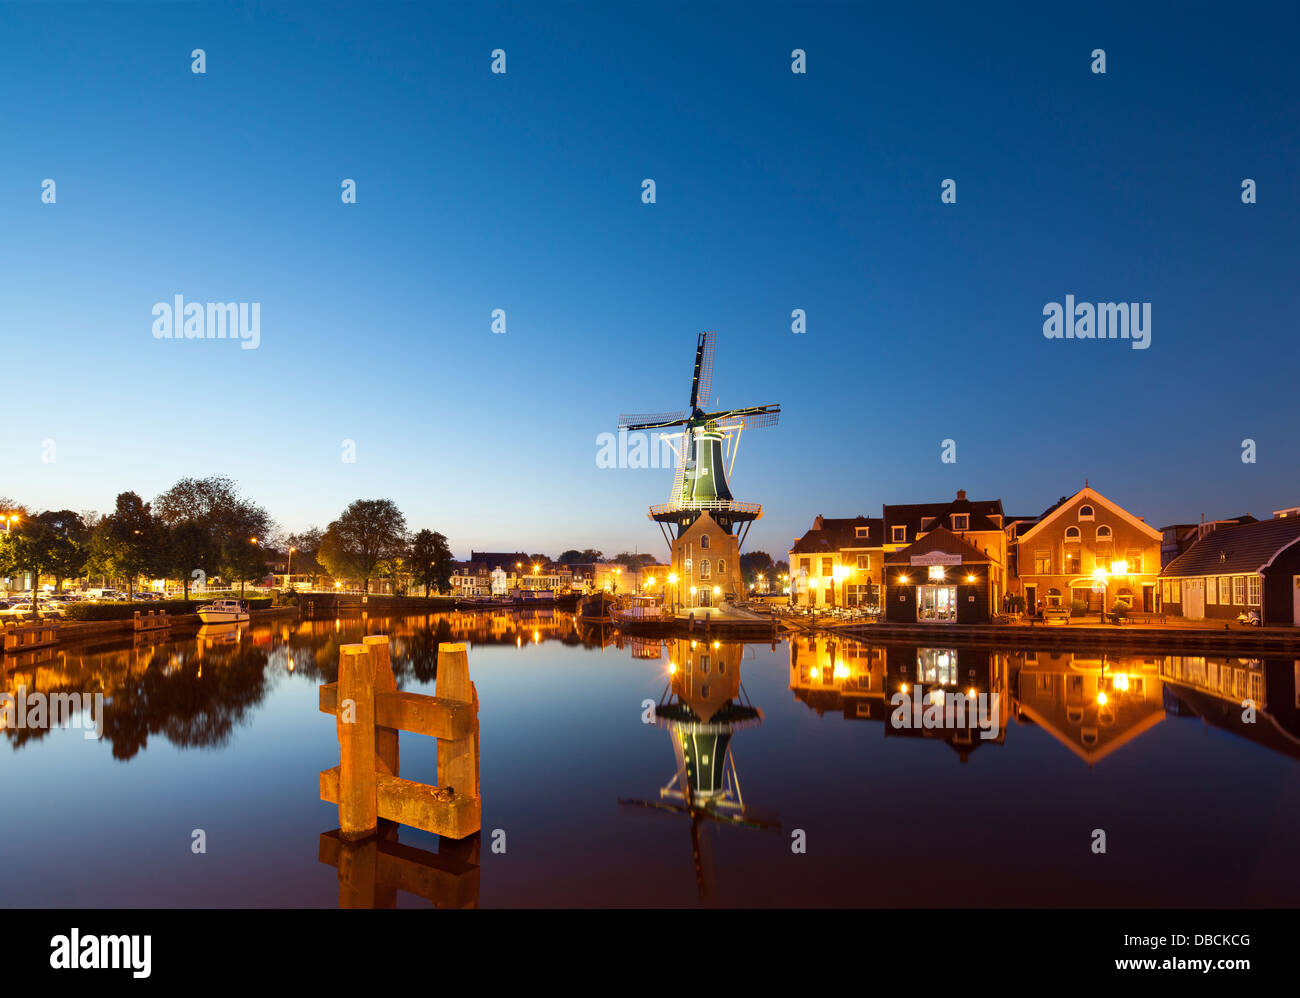 Landmark windmill De Adriaan in Haarlem Holland, The Netherlands. On the Spaarne River, canal with restaurant Zuidam at dusk Stock Photo